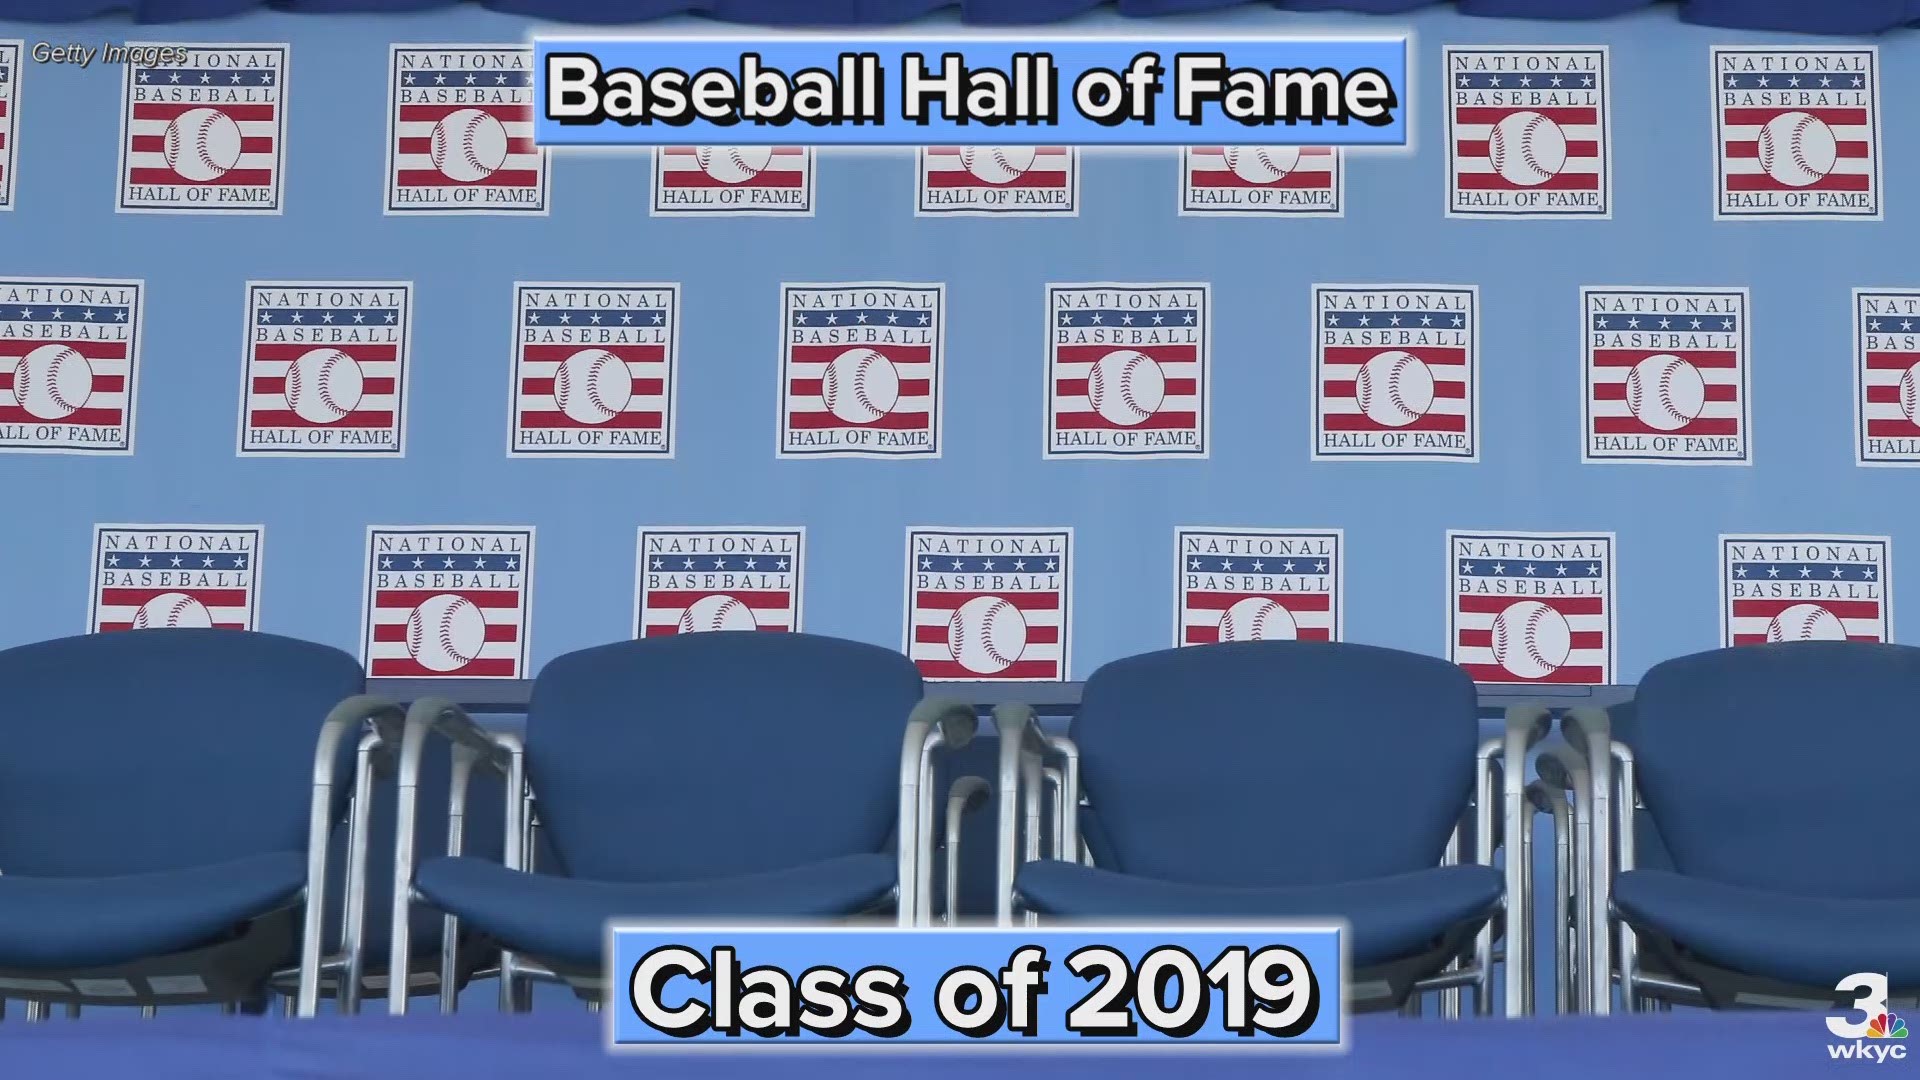 New York Yankees closer Mariano Rivera, Seattle Mariners DH Edgar Martinez, former Toronto Blue Jays/Philadelphia Phillies ace Roy Halladay and 270-game winner Mike Mussina headline the National Baseball Hall of Fame Class of 2019.